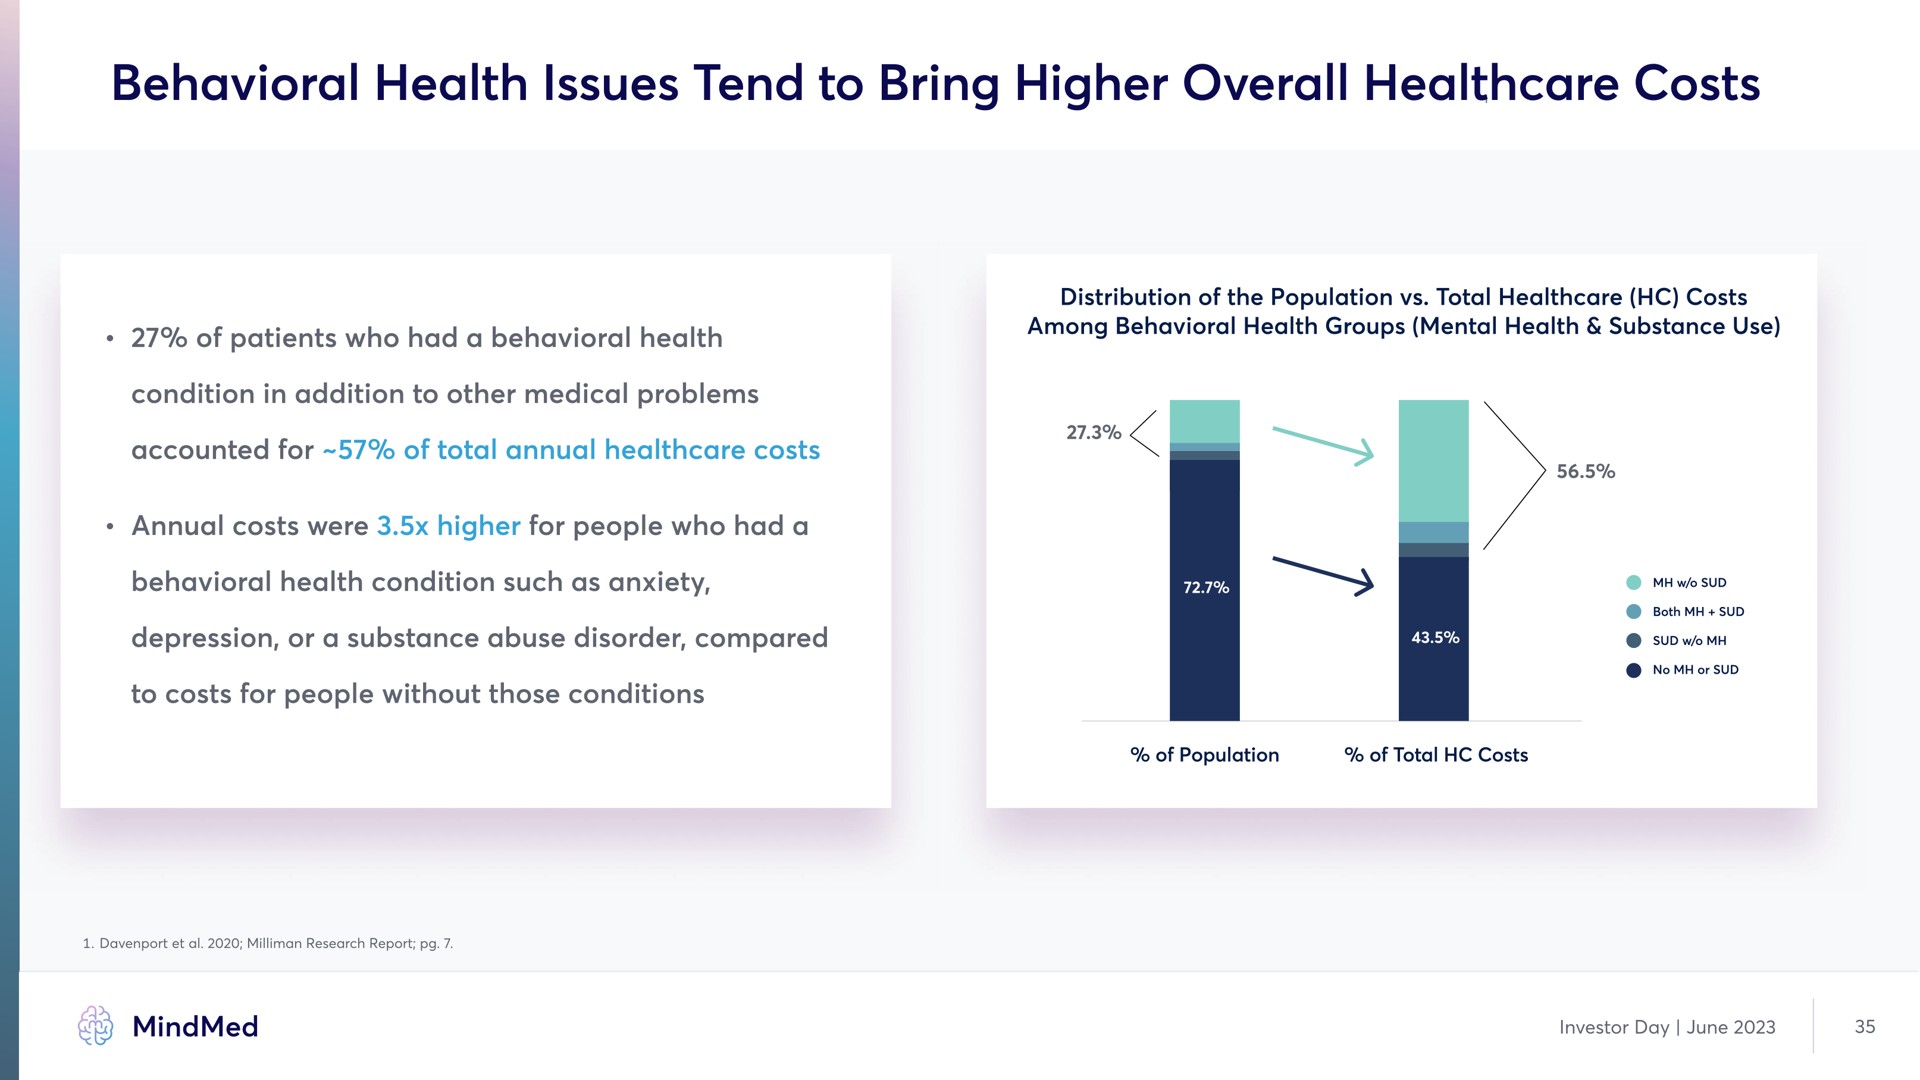 behavioral health issues tend to bring higher overall costs | MindMed